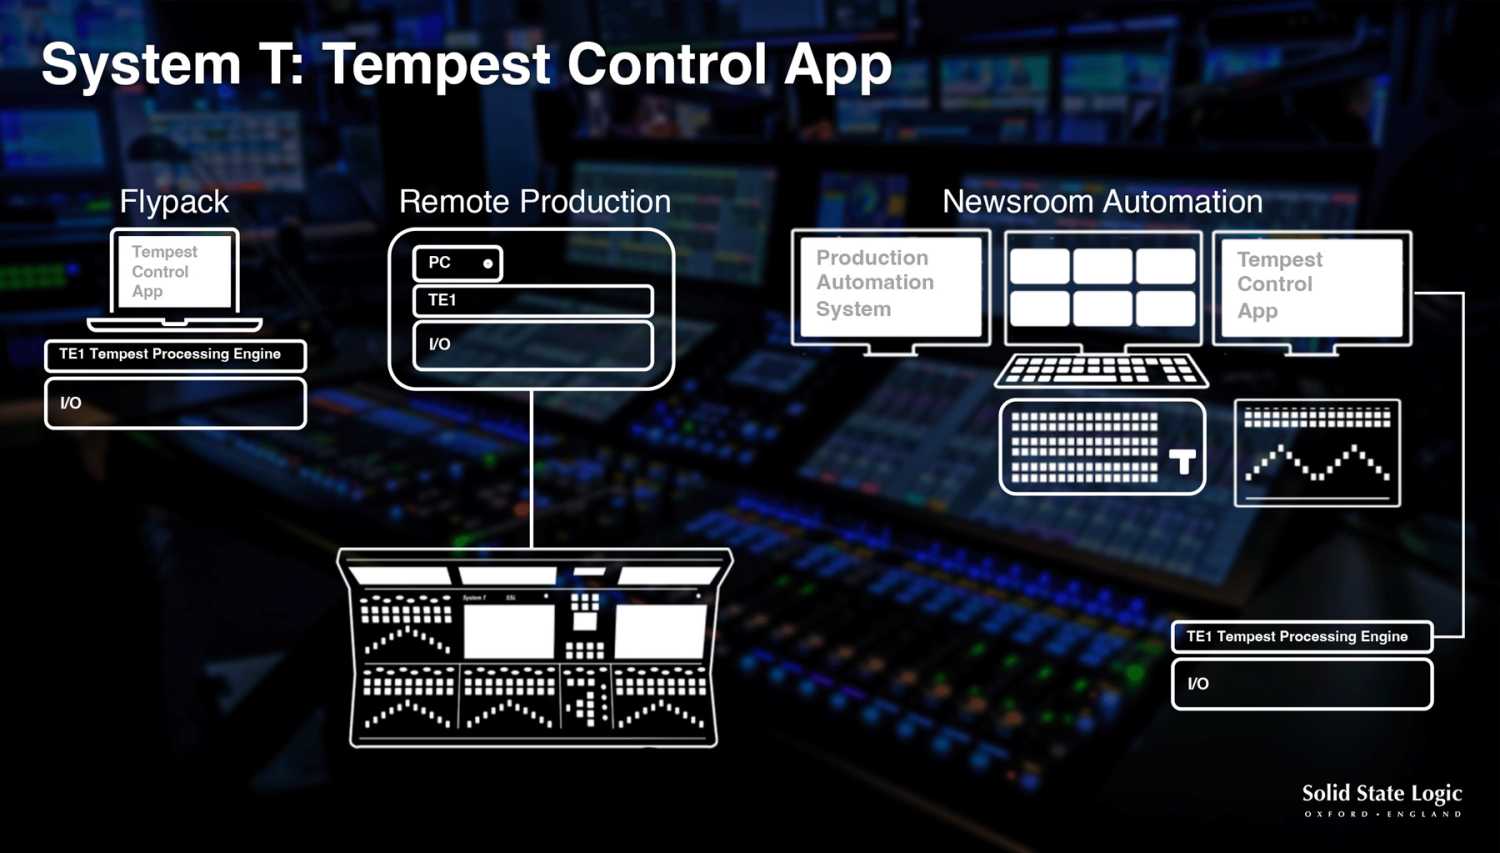 ‘TCA is a robust and highly scalable control solution for key broadcast audio applications’